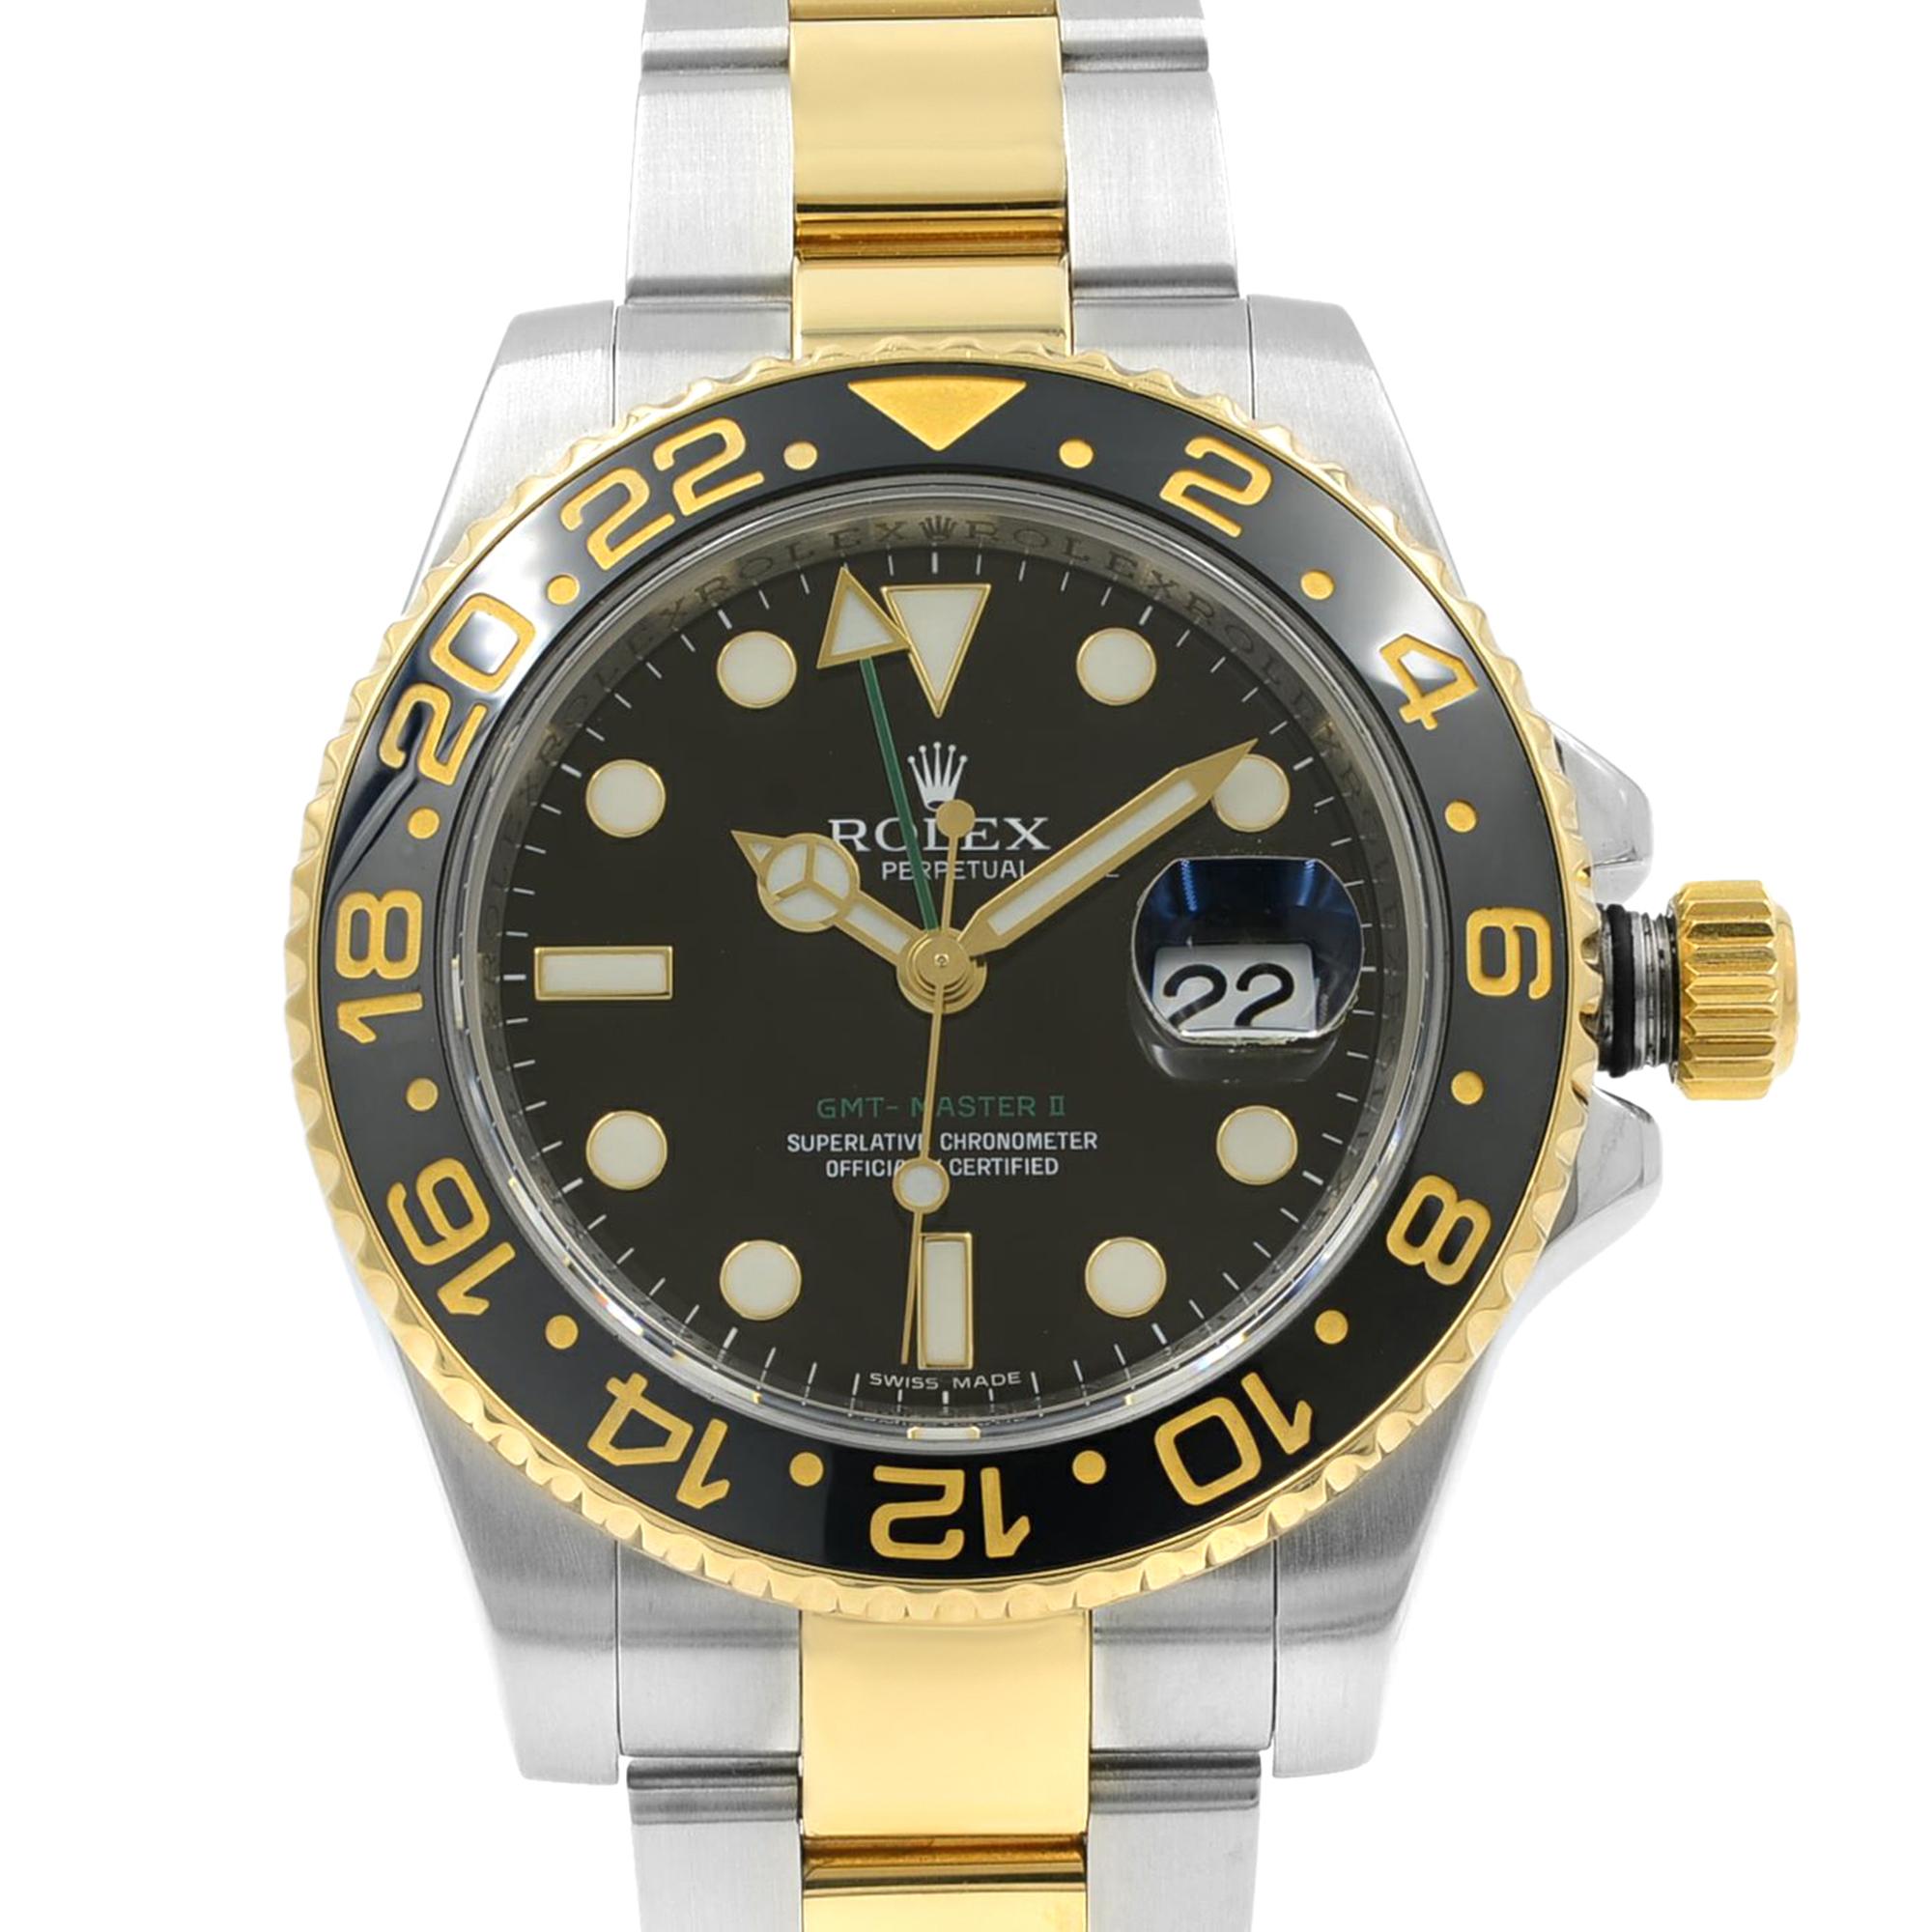 This pre-owned Rolex GMT-Master II 116713LN is a beautiful men's timepiece that is powered by mechanical (automatic) movement which is cased in a stainless steel case. It has a round shape face, date indicator dial and has hand sticks & dots style